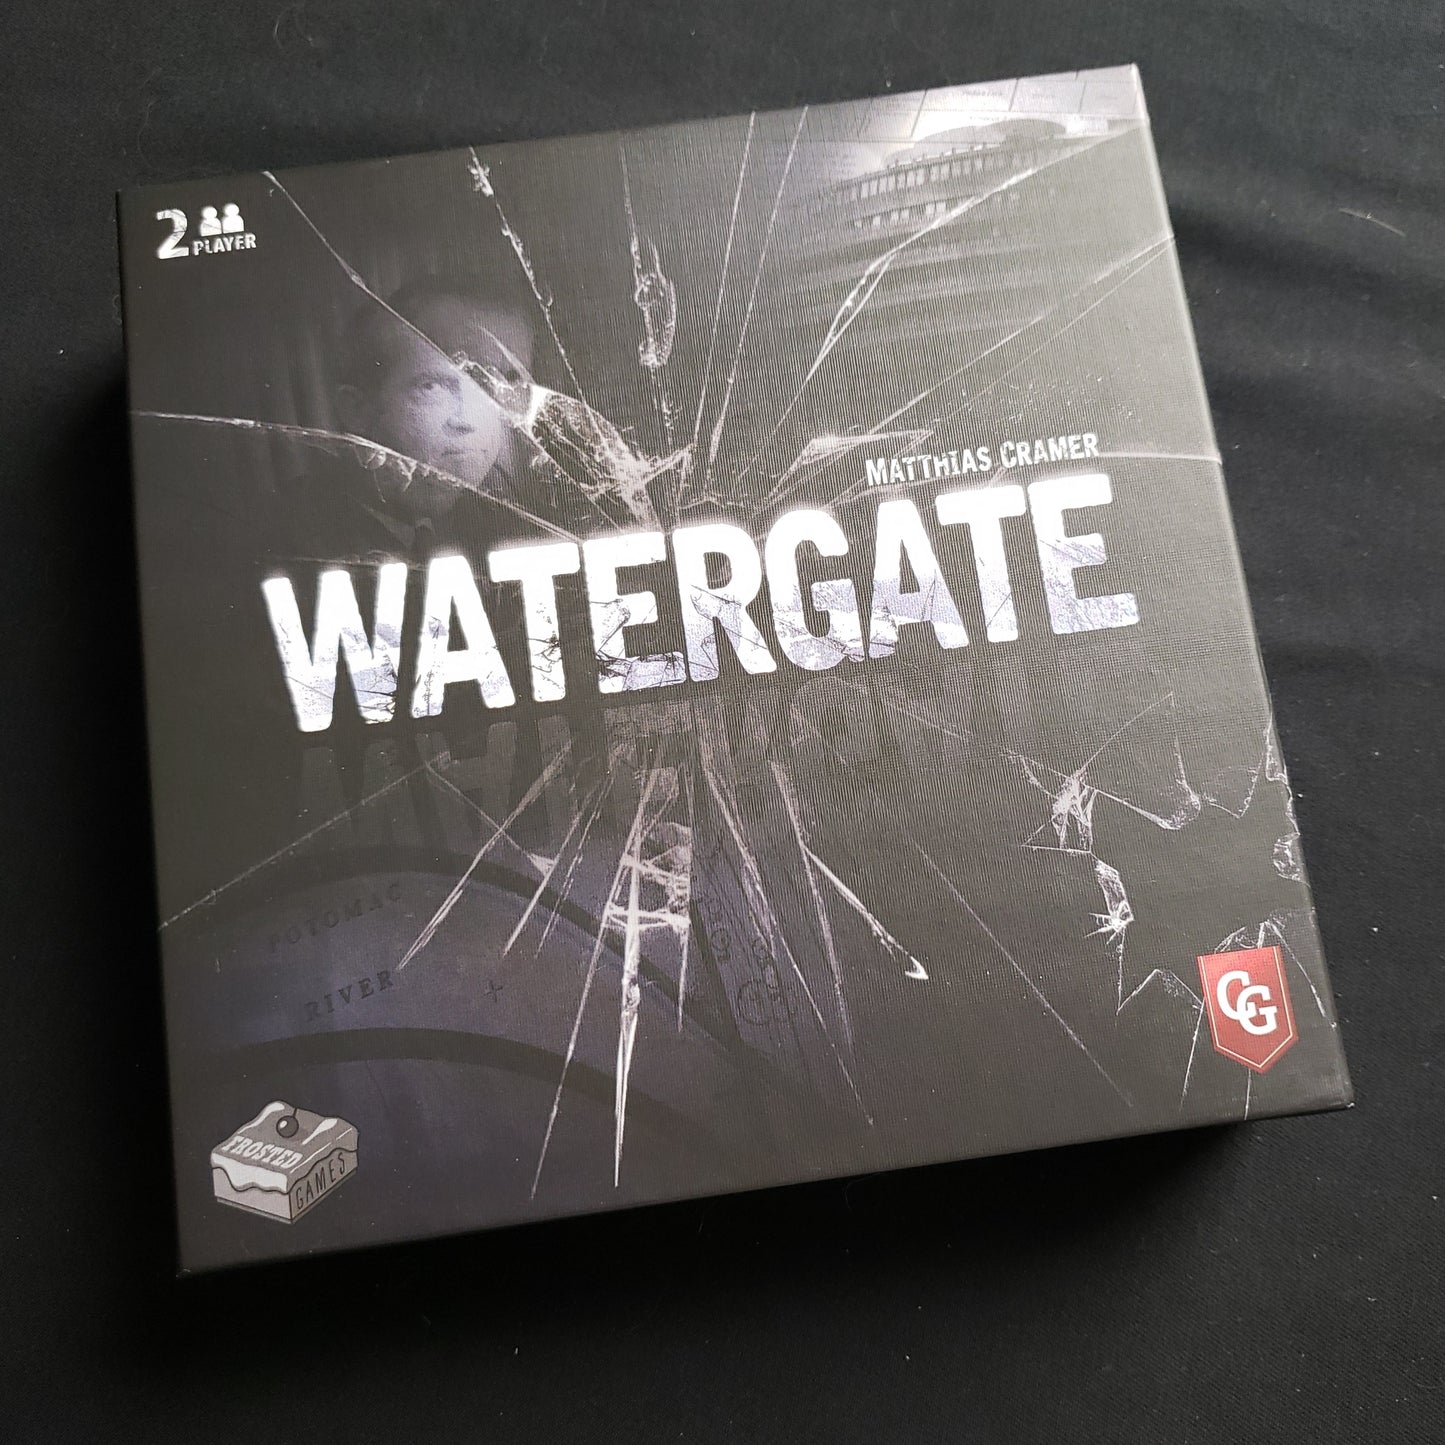 Image shows the front cover of the box of the Watergate board game